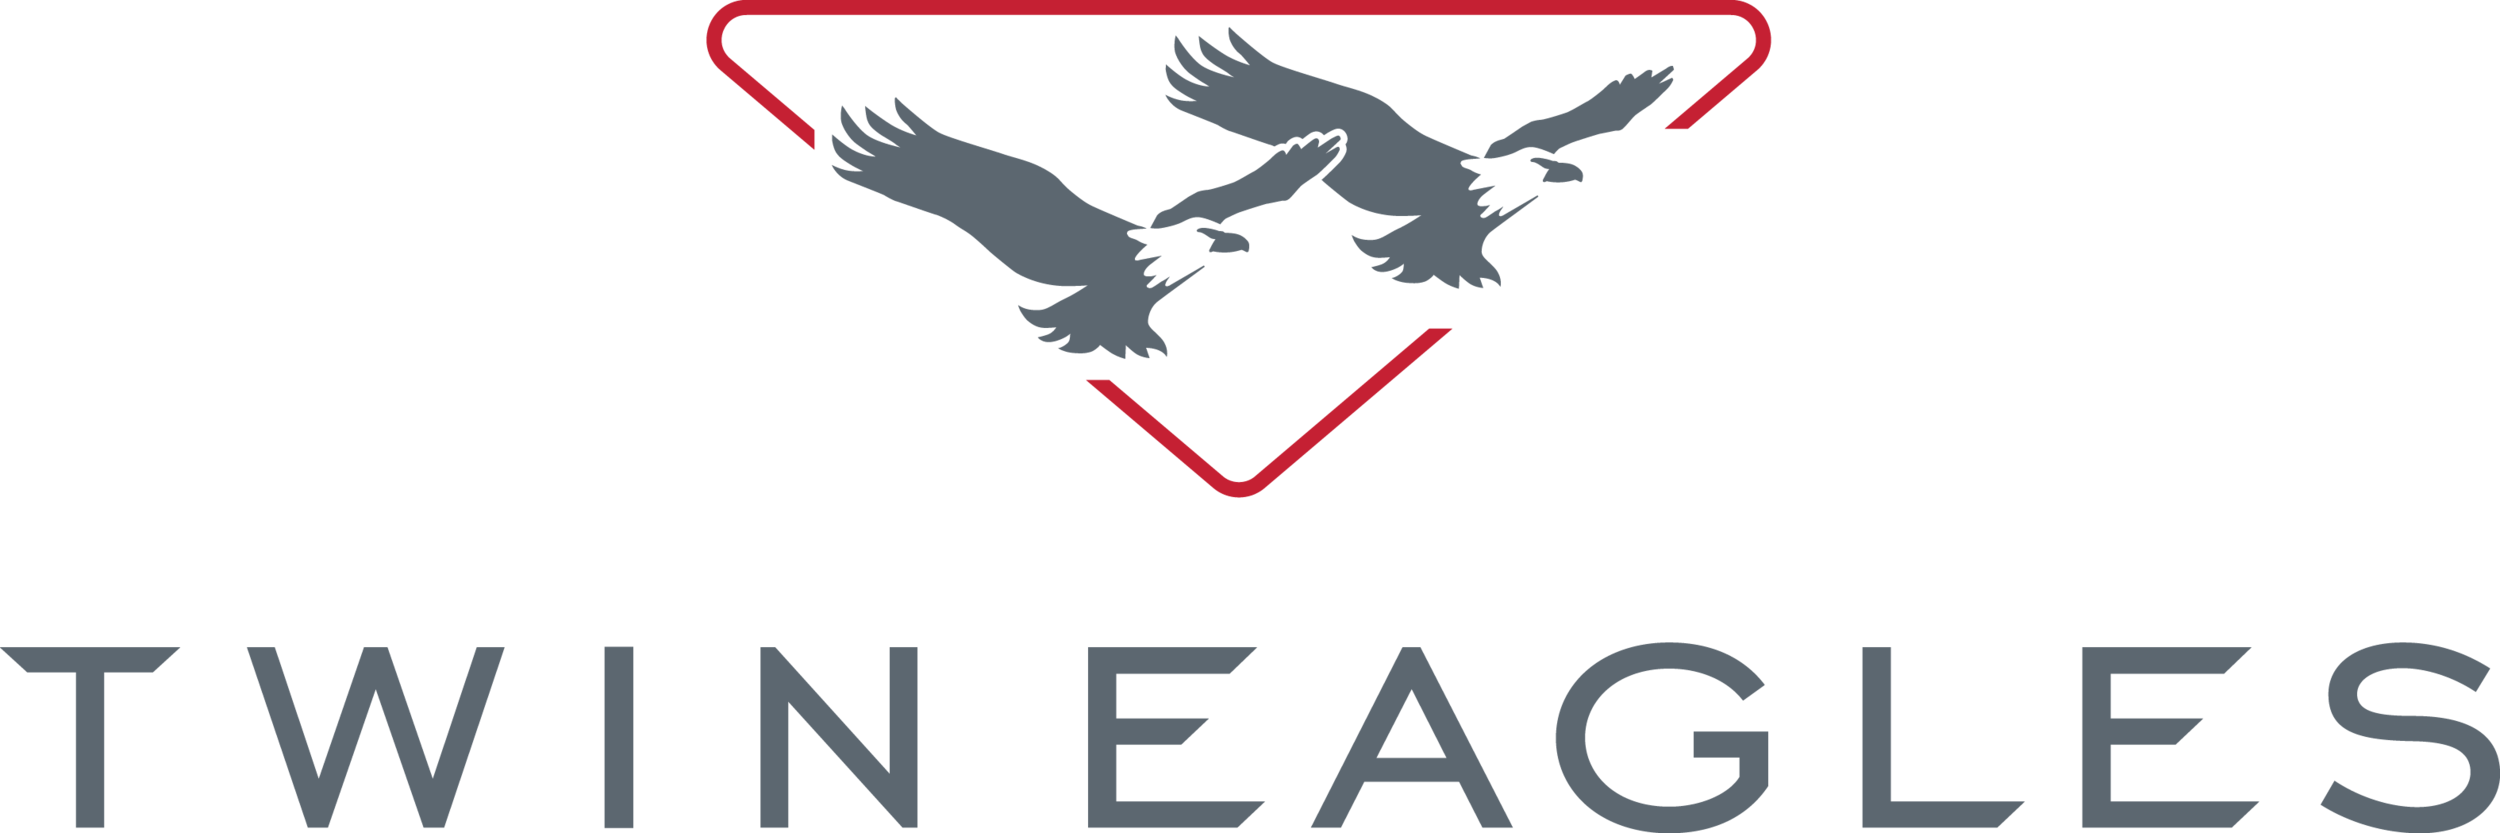 2017_TwinEagles_logo.png